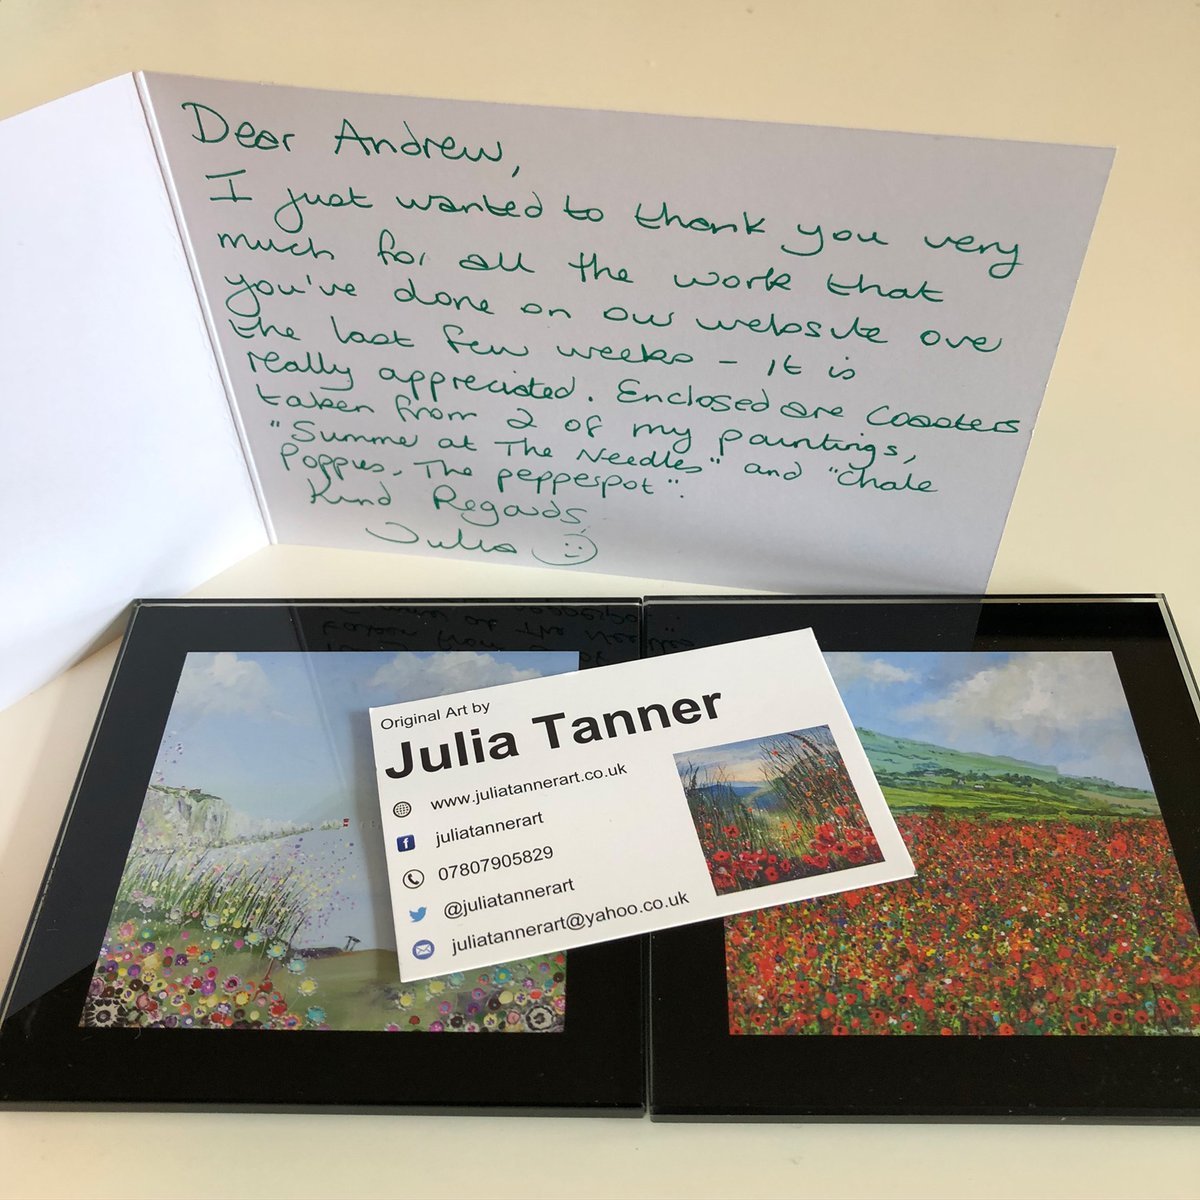 Wow, it's not often that we get sent a gift from a customer! Thank you @juliatannerart for sending us some of your beautiful Isle of Wight glass coasters! You can browse Julia's artwork online at juliatannerart.co.uk/shop/